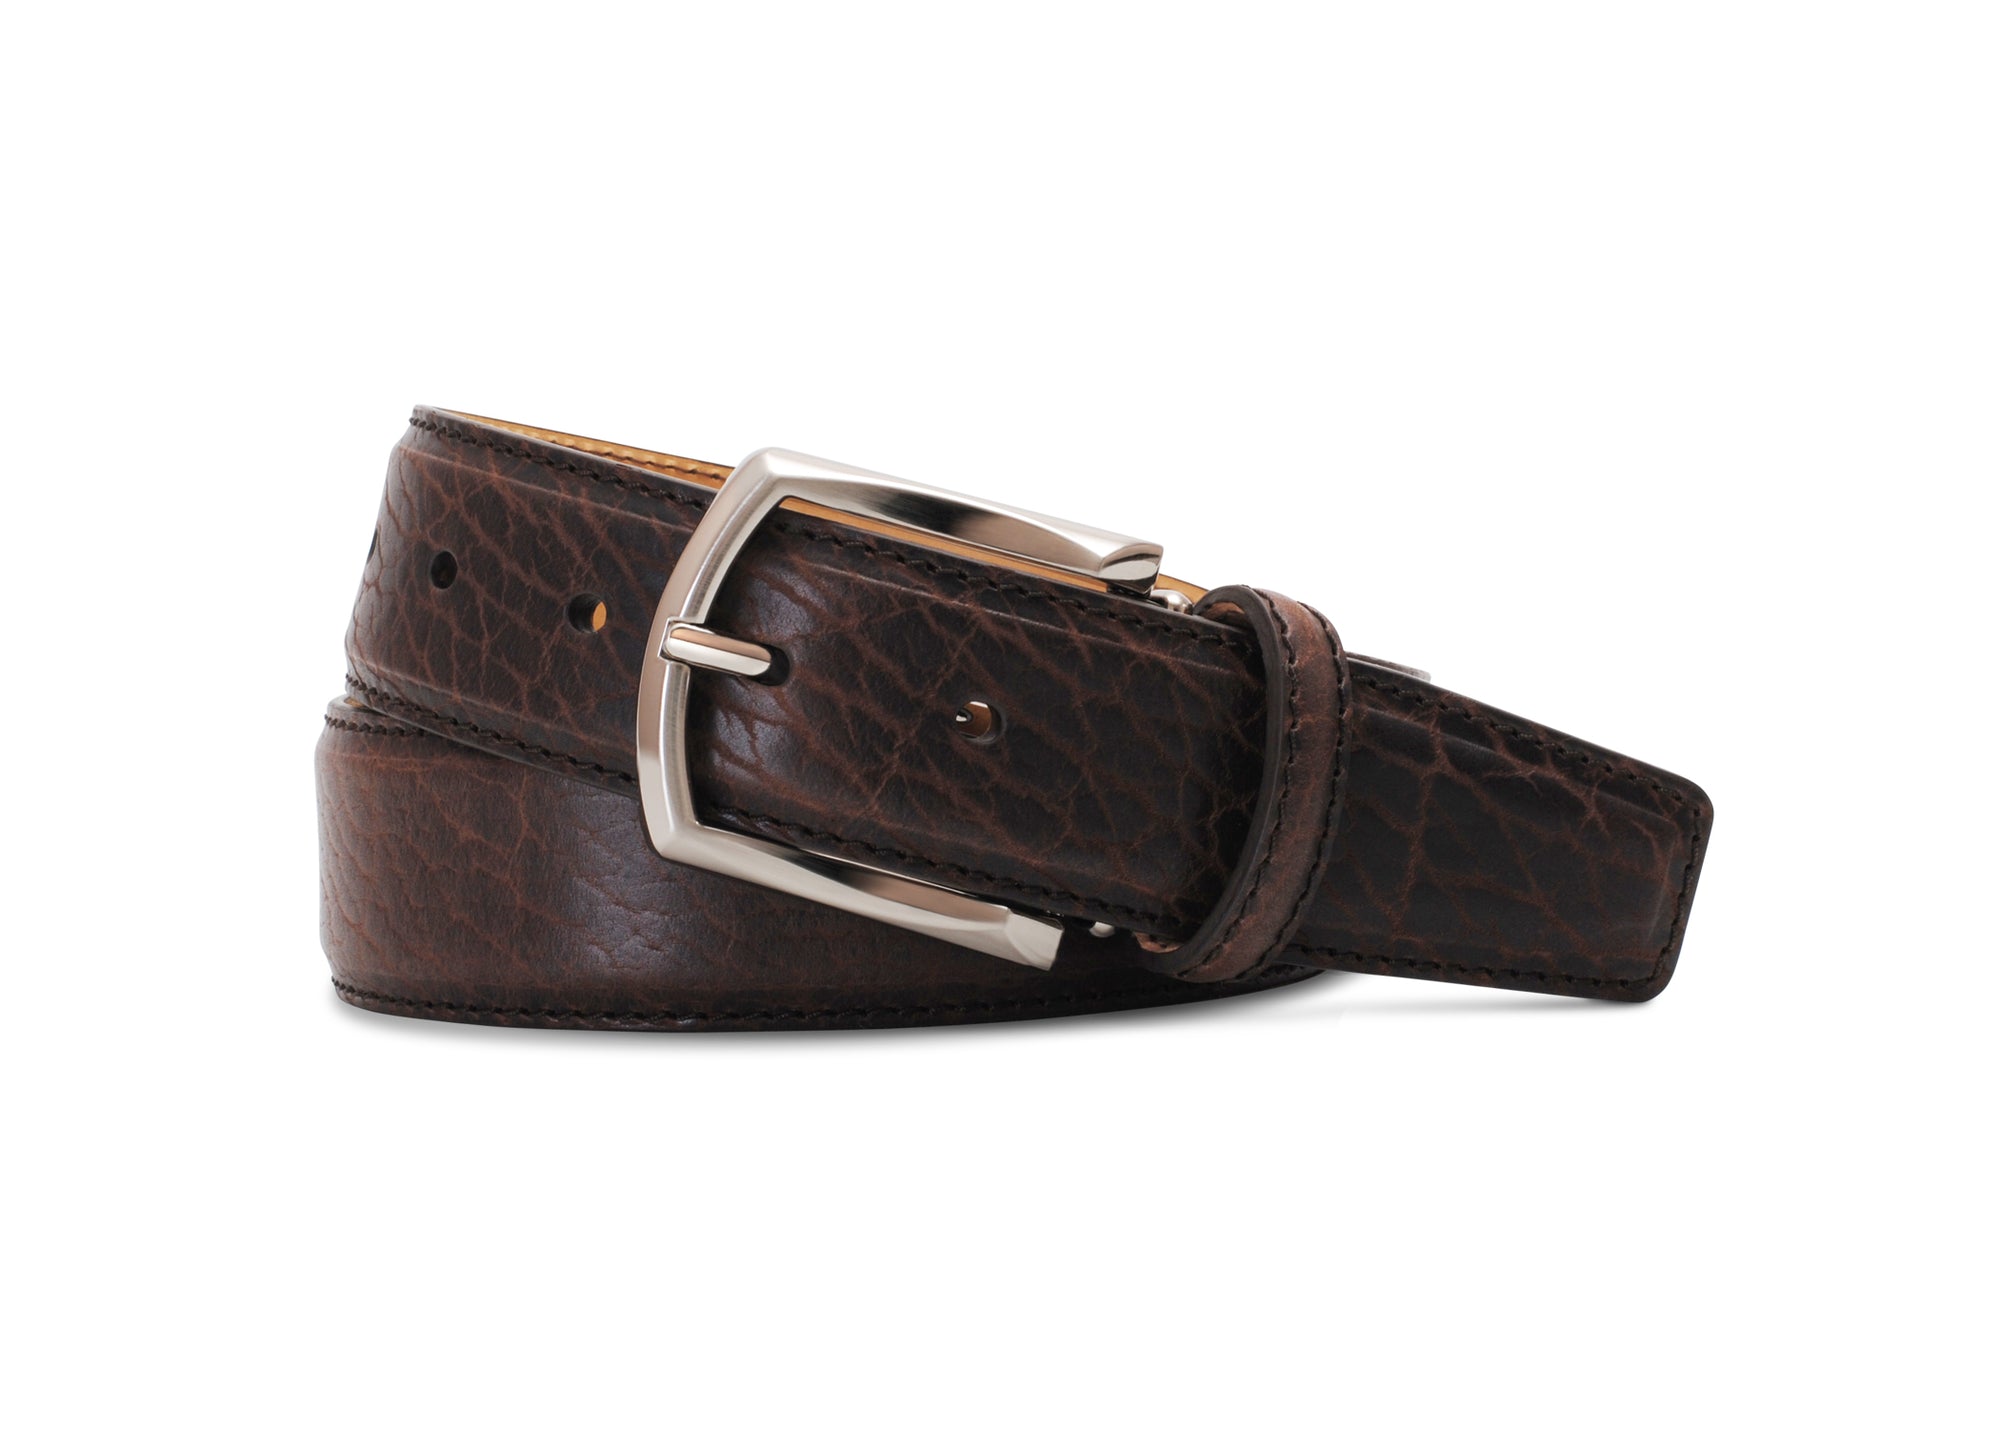 American Bison Belt in Chocolate by Brookes & Hyde